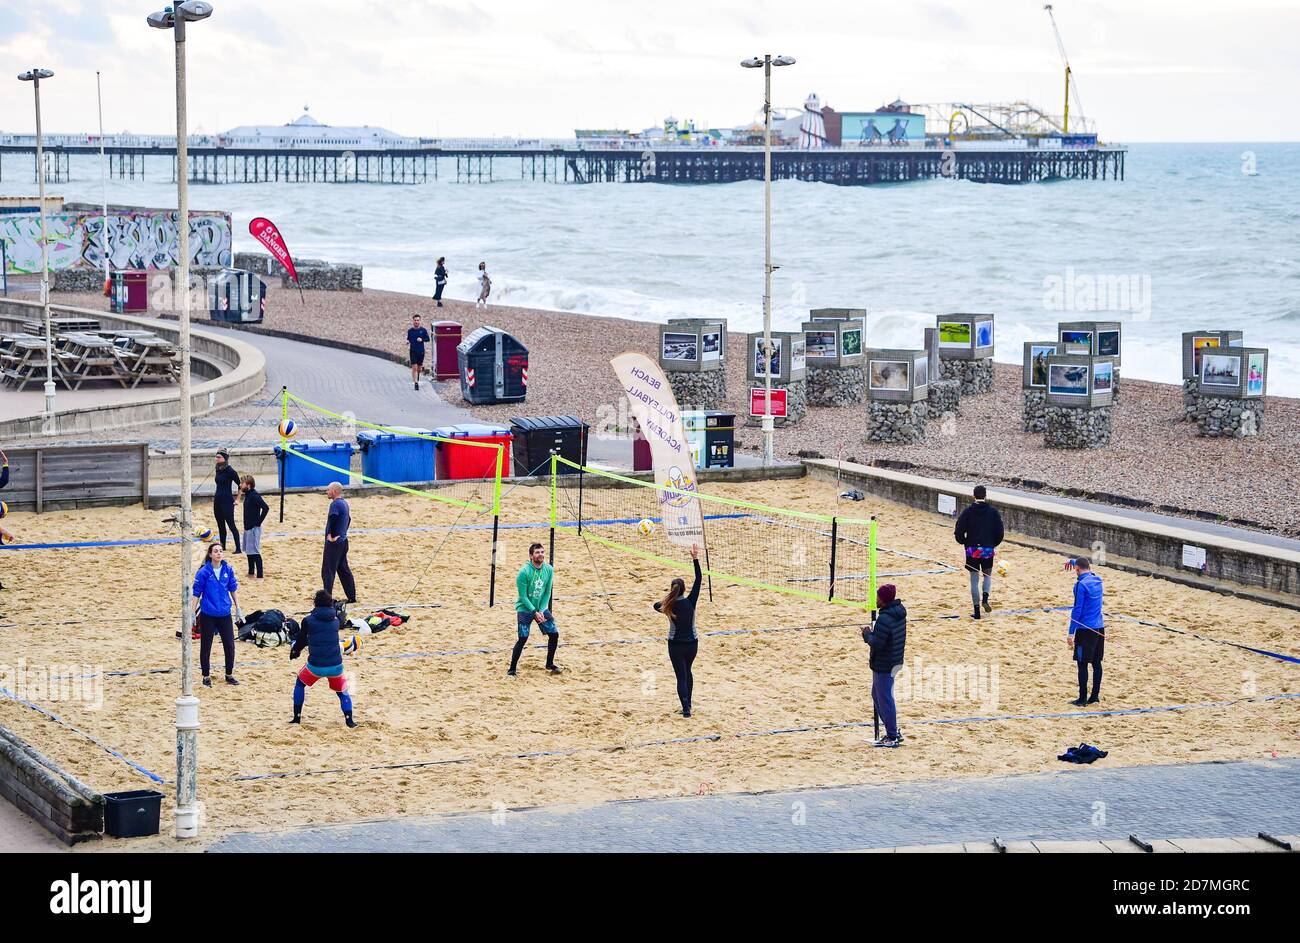 Brighton UK 24th October 2020 - Beach volleyball players out early on Brighton seafront on a blustery morning with the weather forecast to be more unsettled over the weekend throughout Britain : Credit Simon Dack / Alamy Live News Stock Photo